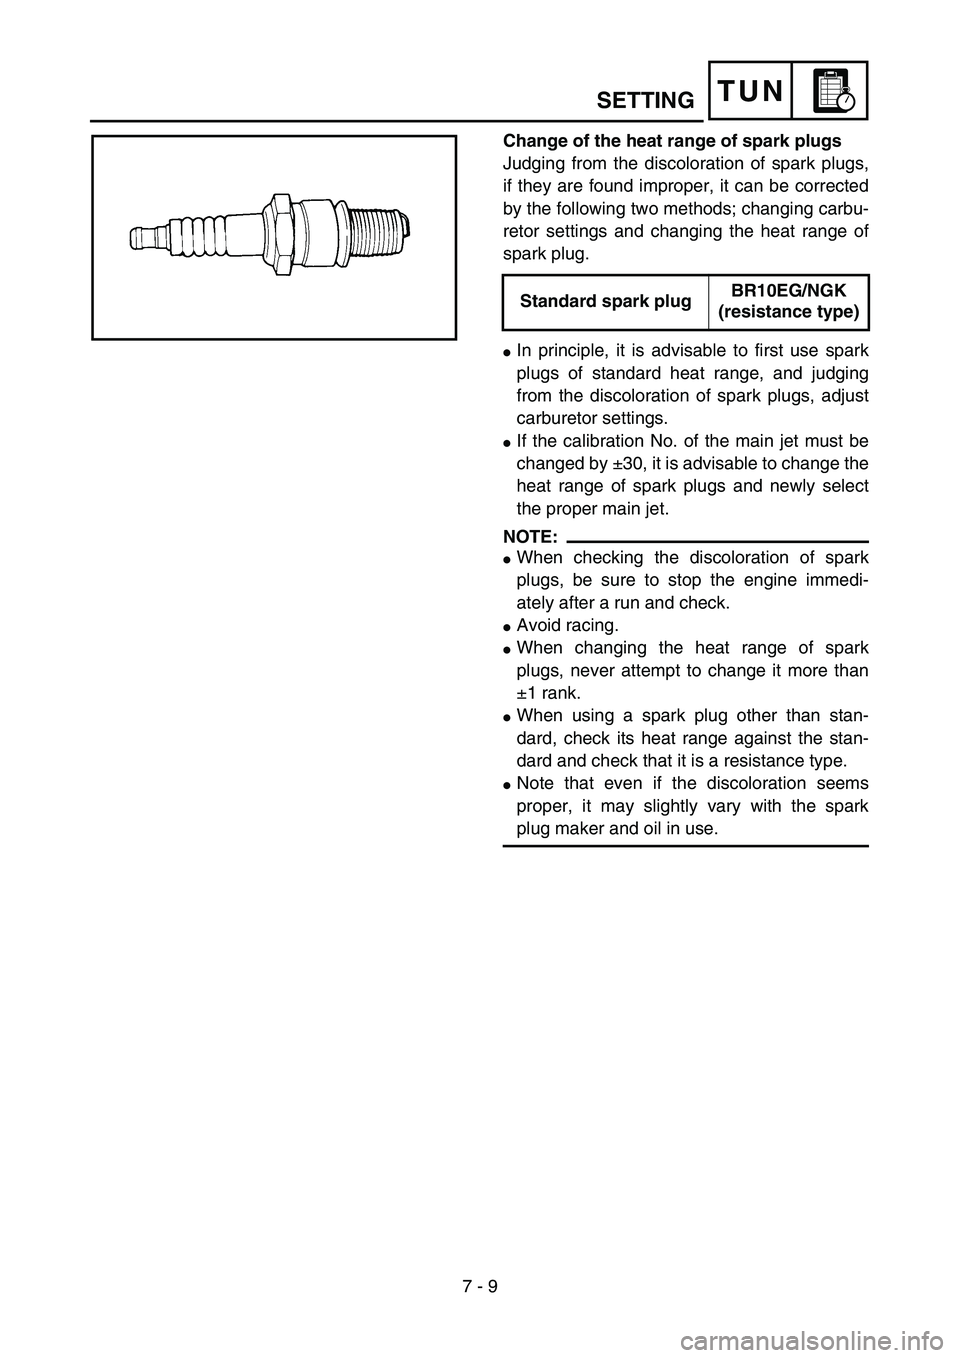 YAMAHA YZ85 2003  Betriebsanleitungen (in German) 7 - 9
TUNSETTING
Change of the heat range of spark plugs
Judging from the discoloration of spark plugs,
if they are found improper, it can be corrected
by the following two methods; changing carbu-
re